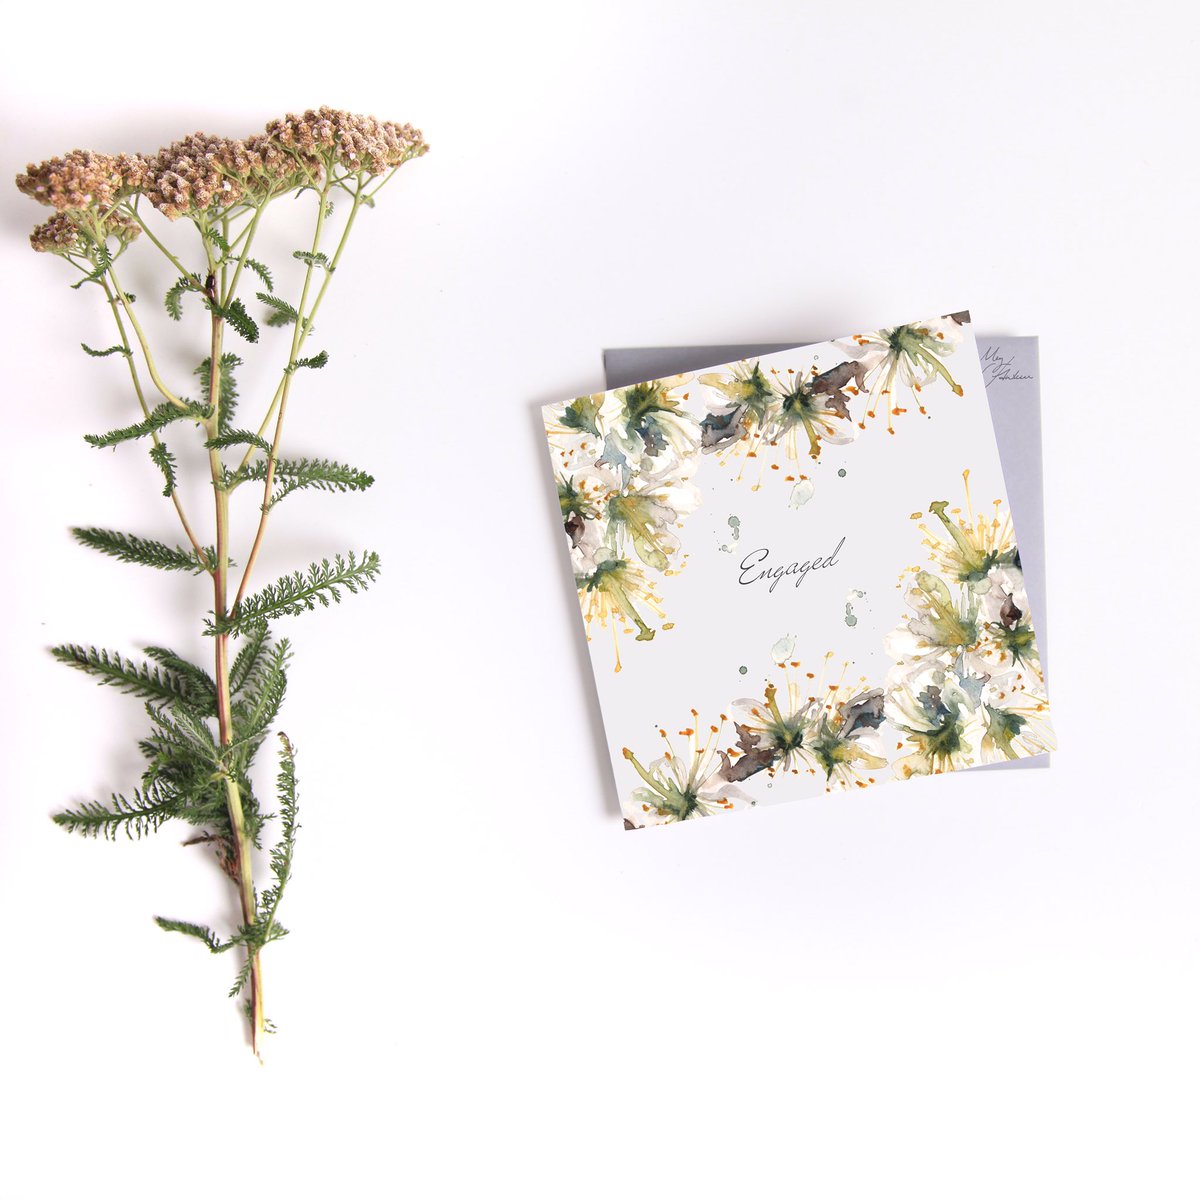 Inspired by nature... well in Shropshire it’s hard not too! A selection of our new botanical sentiment cards... 

@greetingstoday @cardigancards 
#greetingtoday 
#greetingcard  #cards #new #meghawkins @GiftsTodayUK #sentiment  #botanical #inspiredbynature
#artist #designer